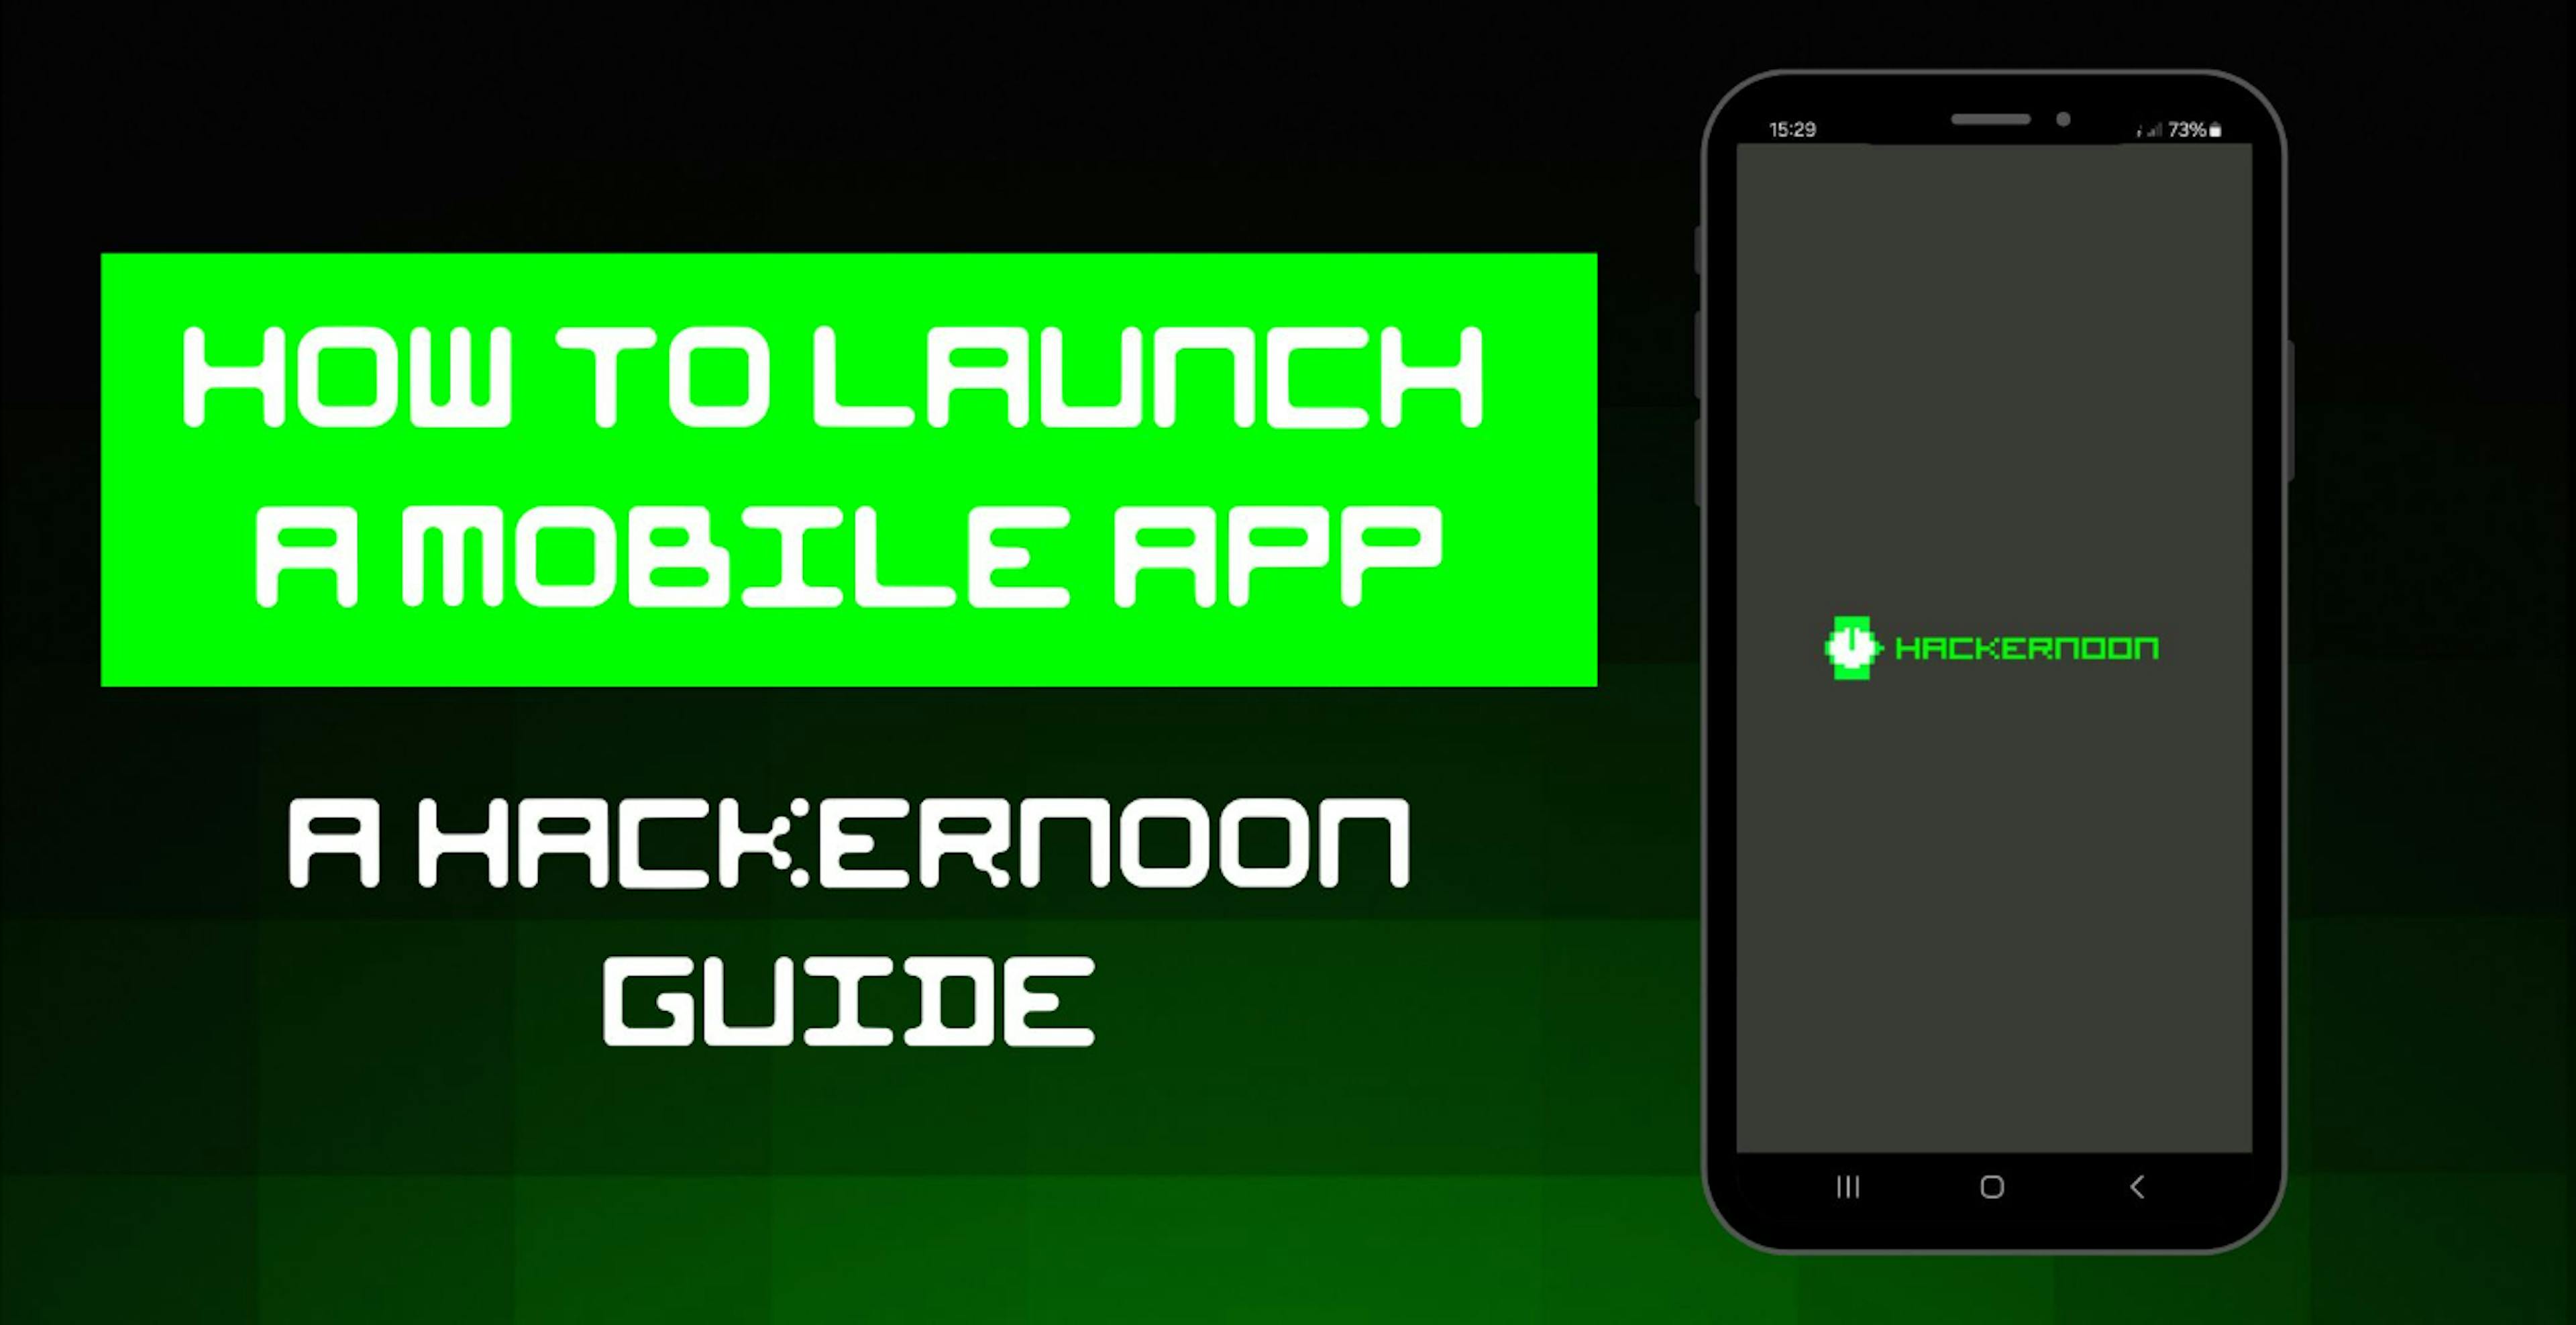 featured image - How to Launch an App: Apple App Store Step-by-step Guide